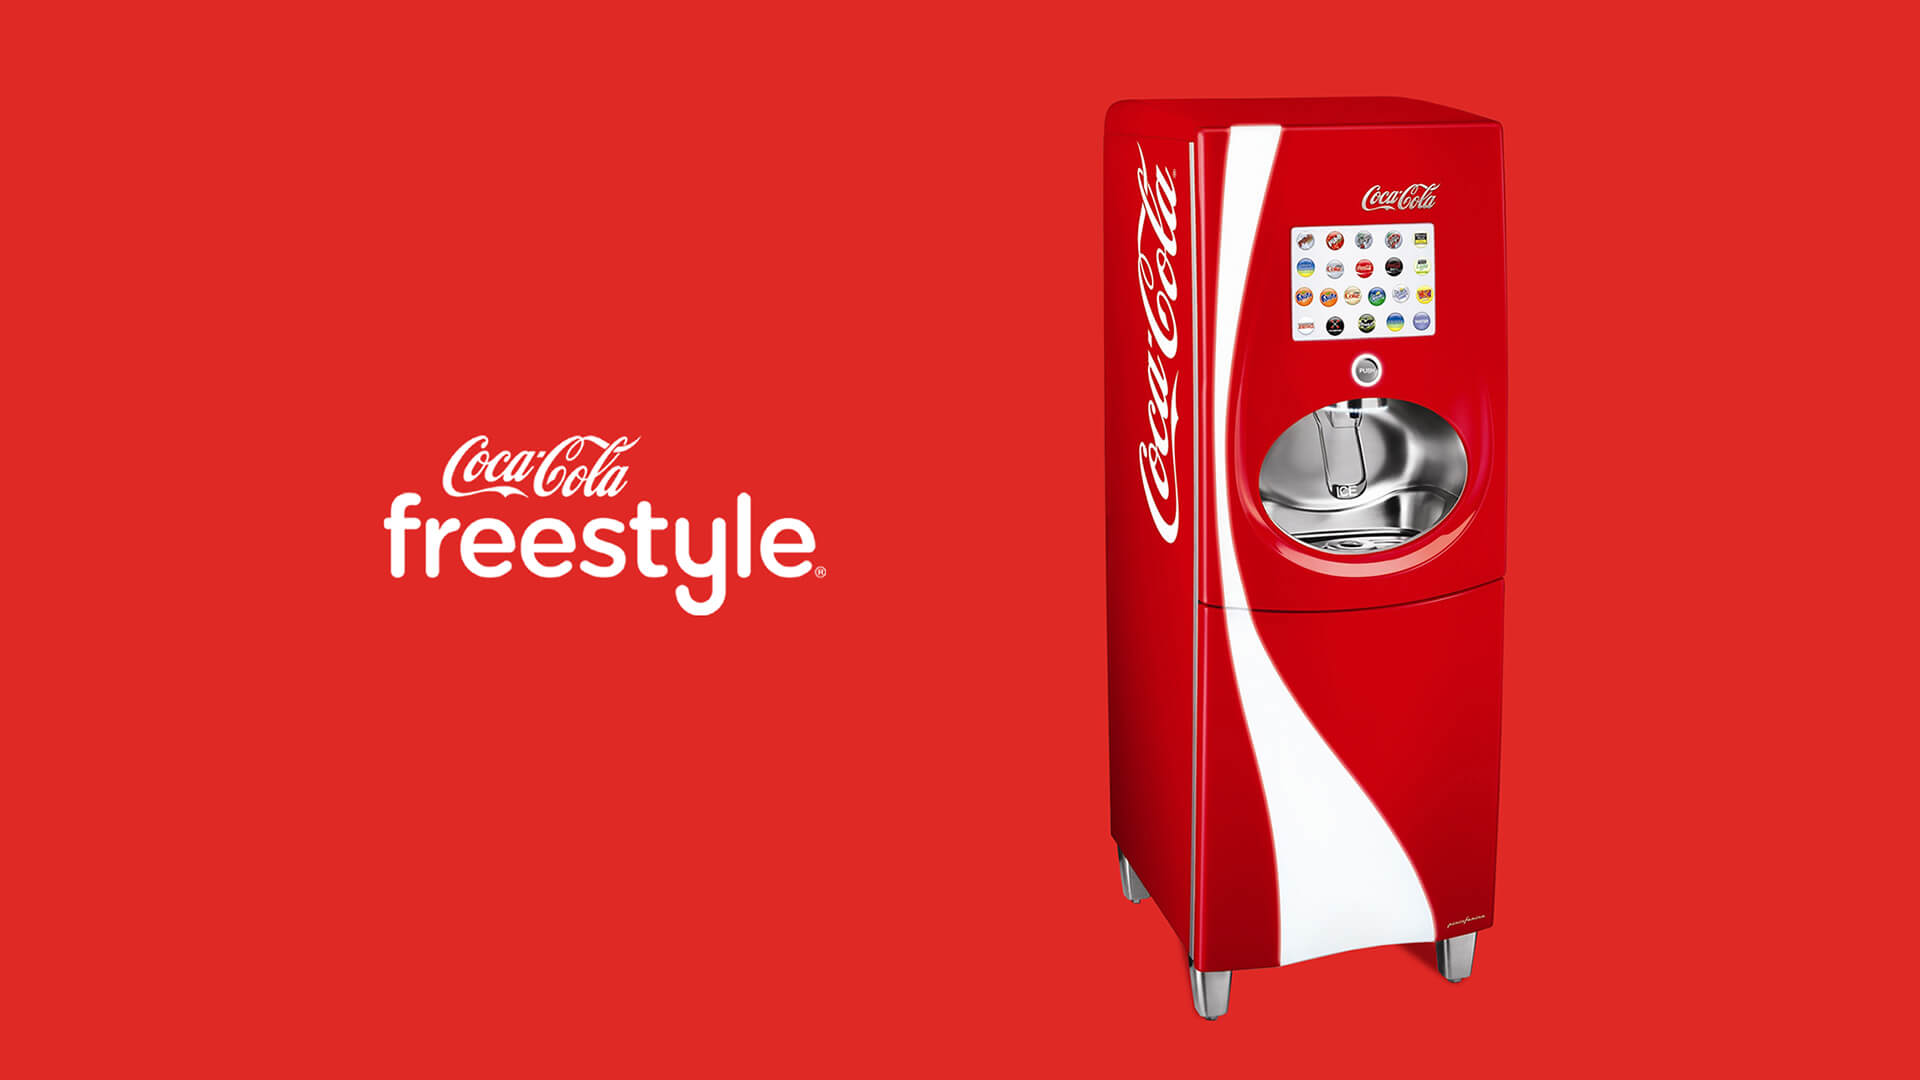 Coca-Cola: Launching a revolutionary new beverage fountain experience